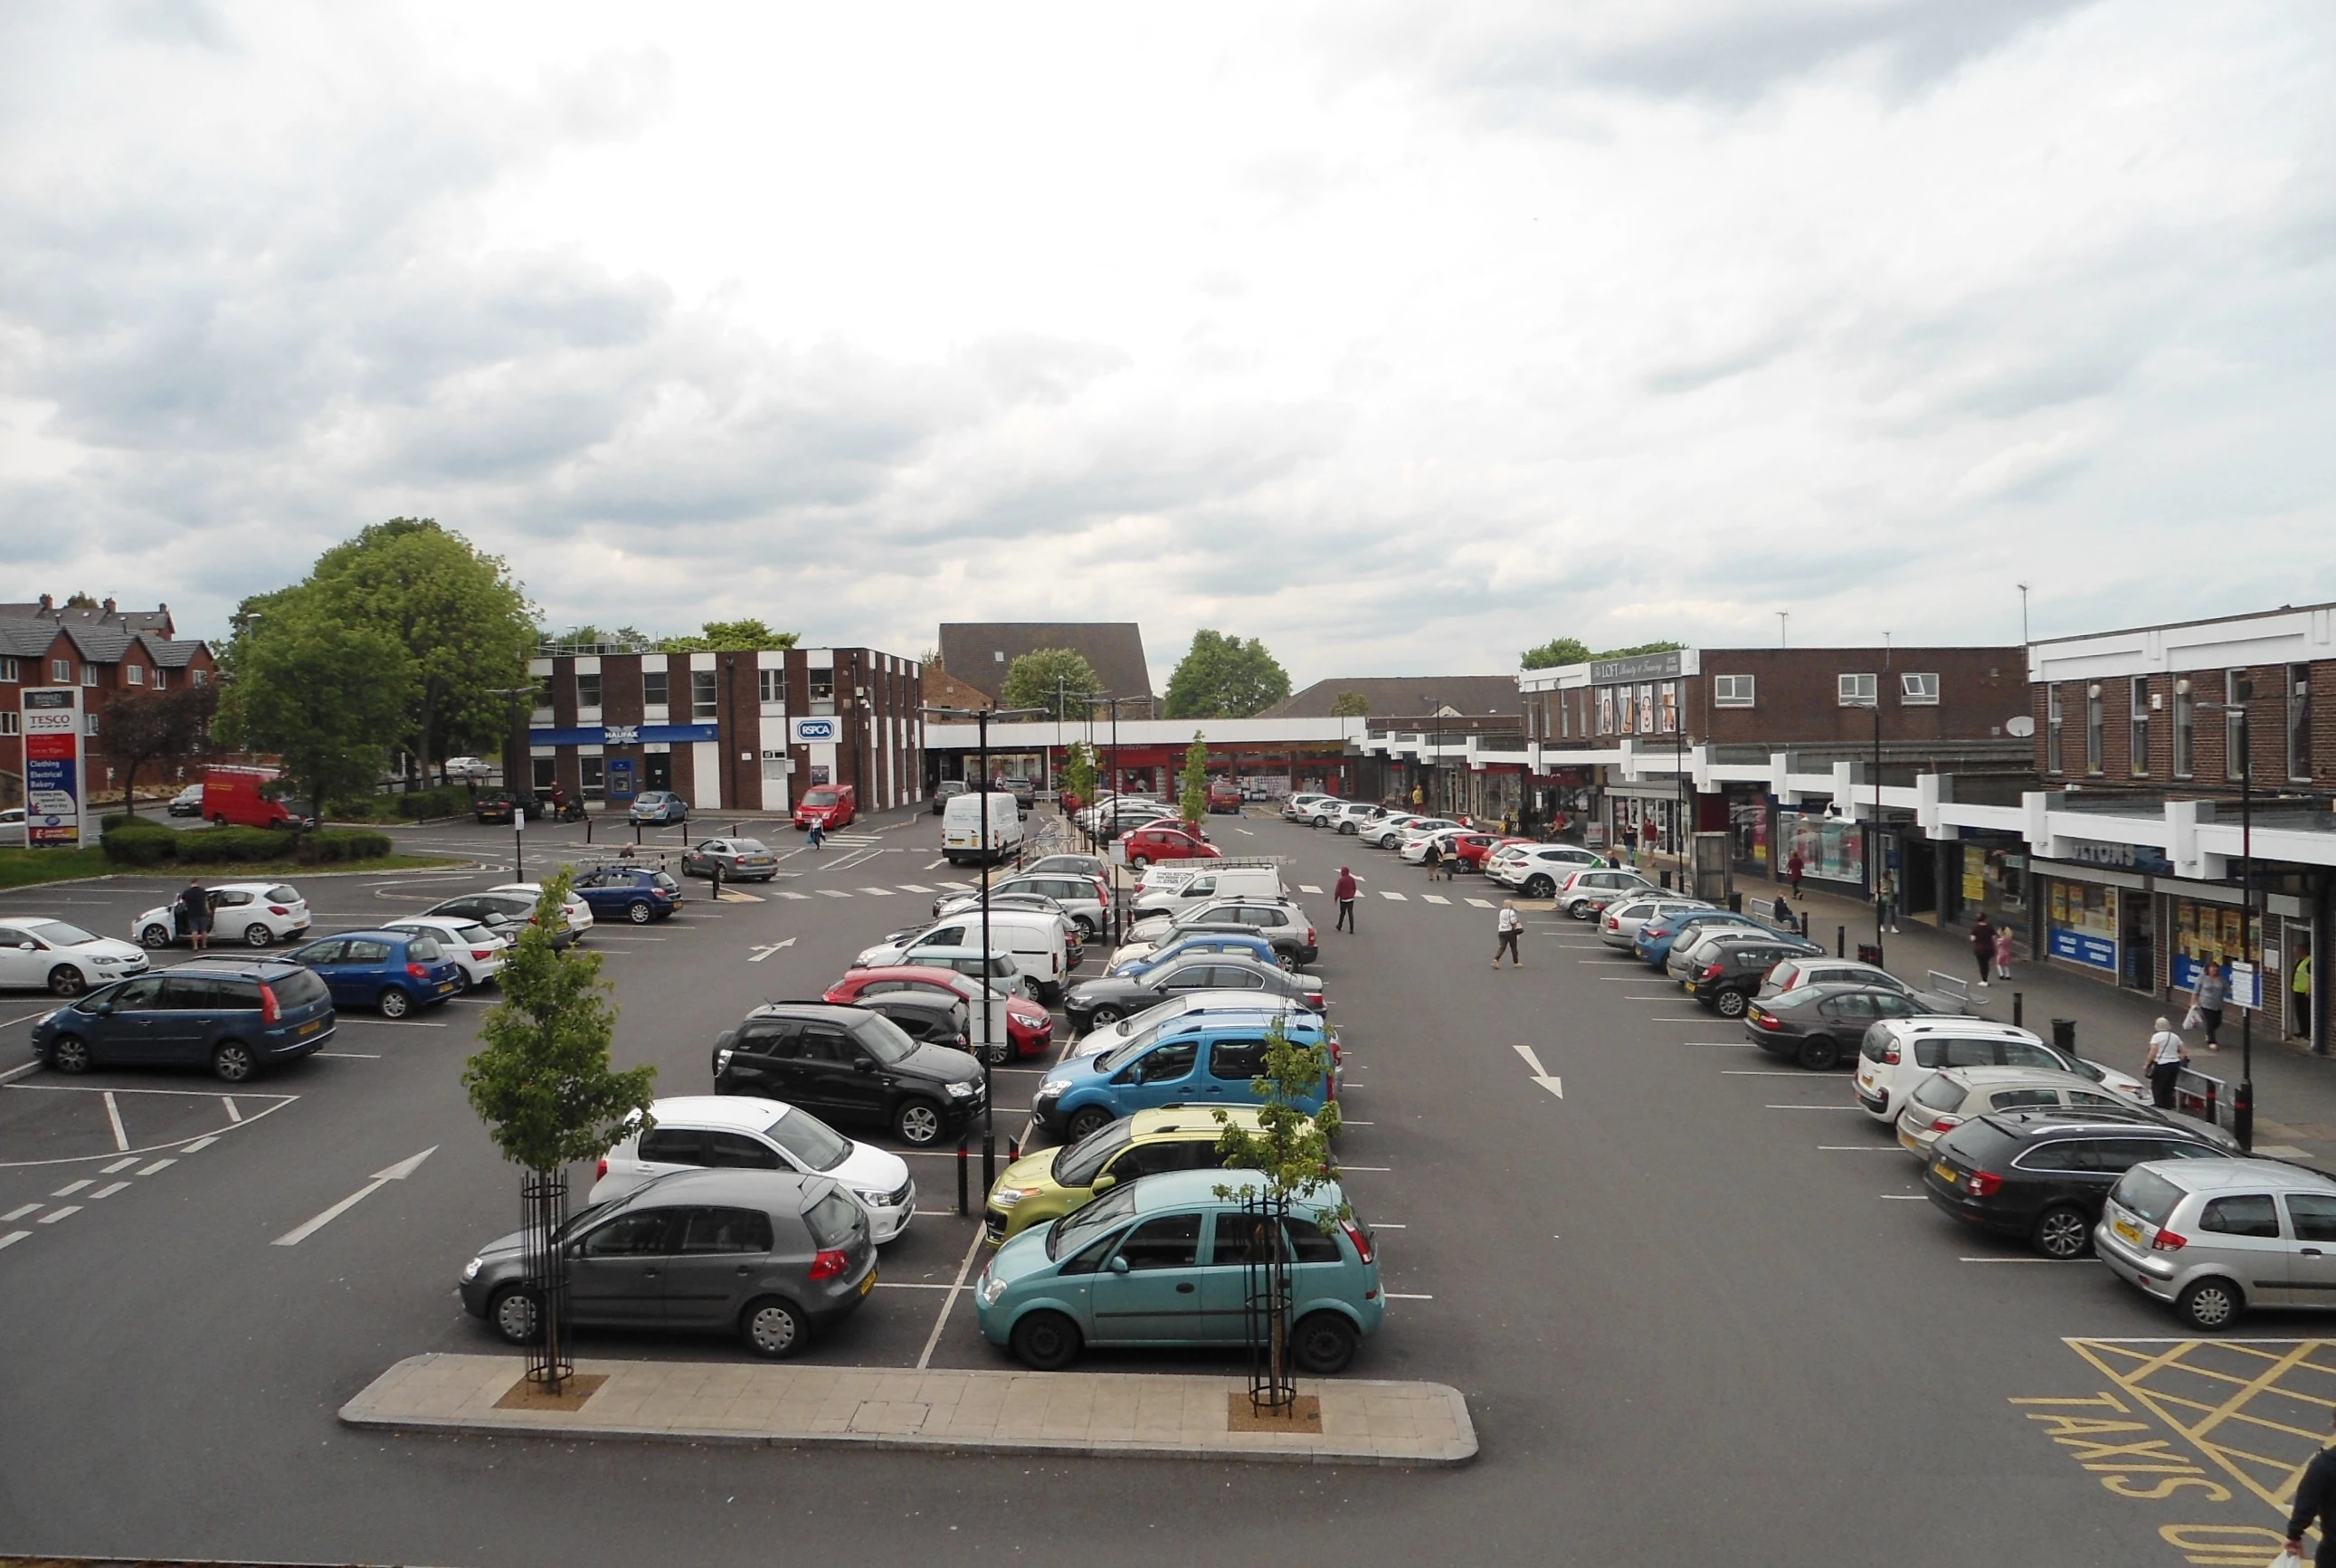 Bramley Shopping Centre, acquired by LCP